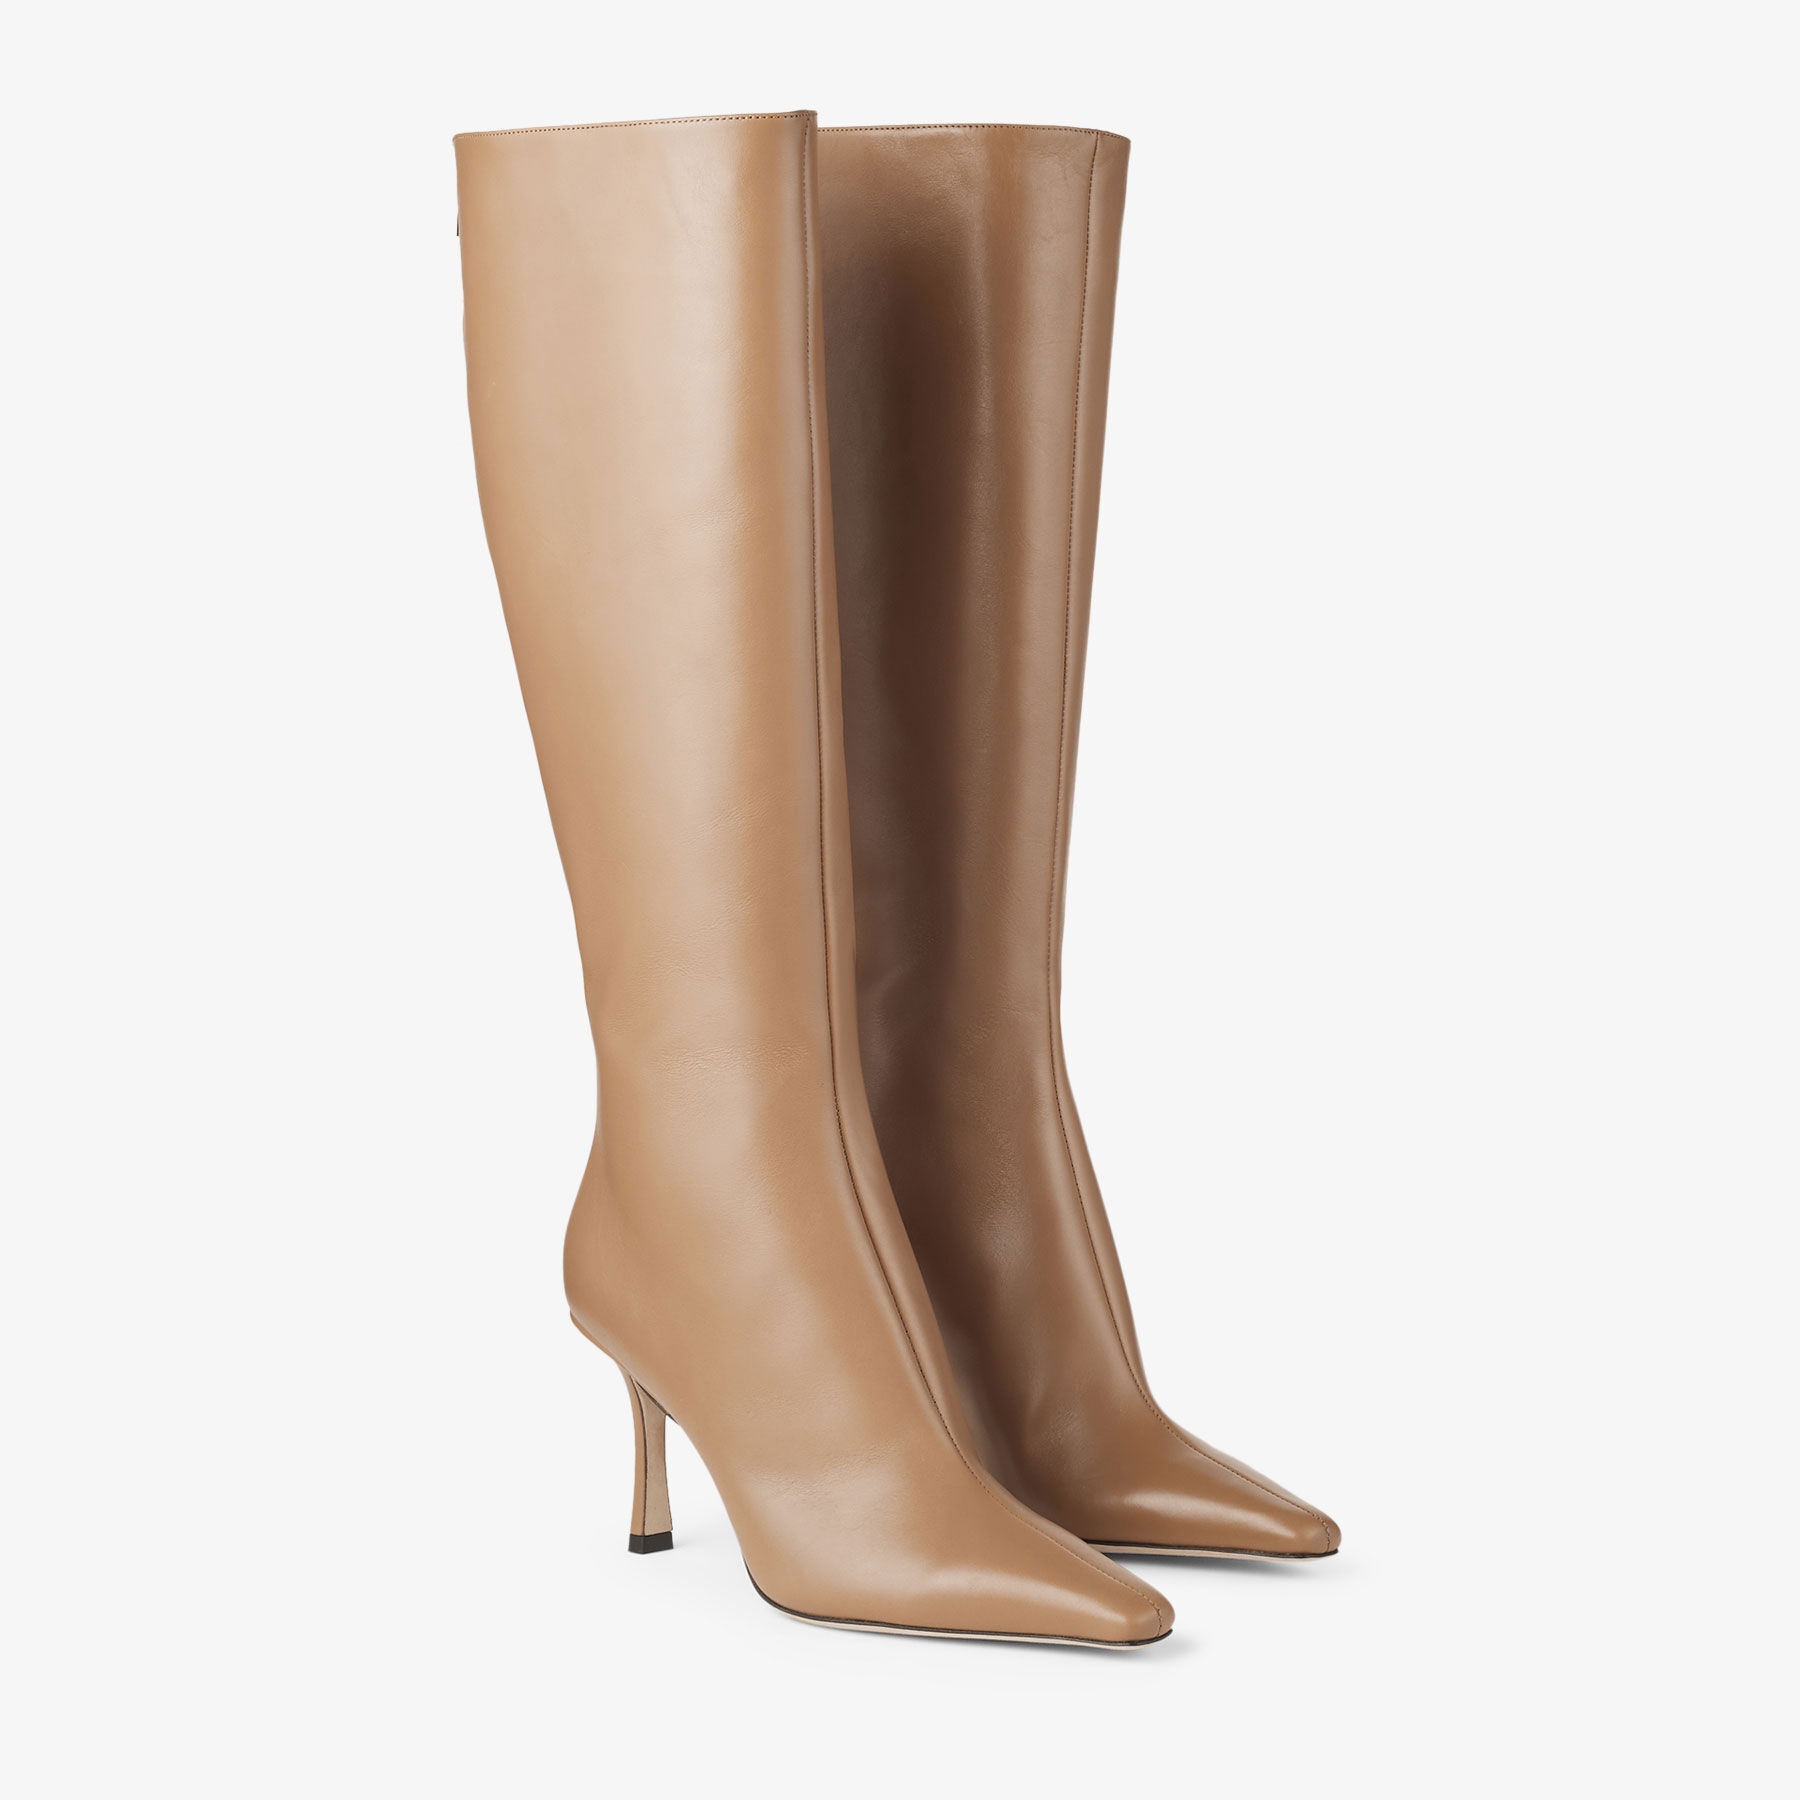 Agathe Knee Boot 85
Biscuit Calf Leather Knee-High Boots - 3